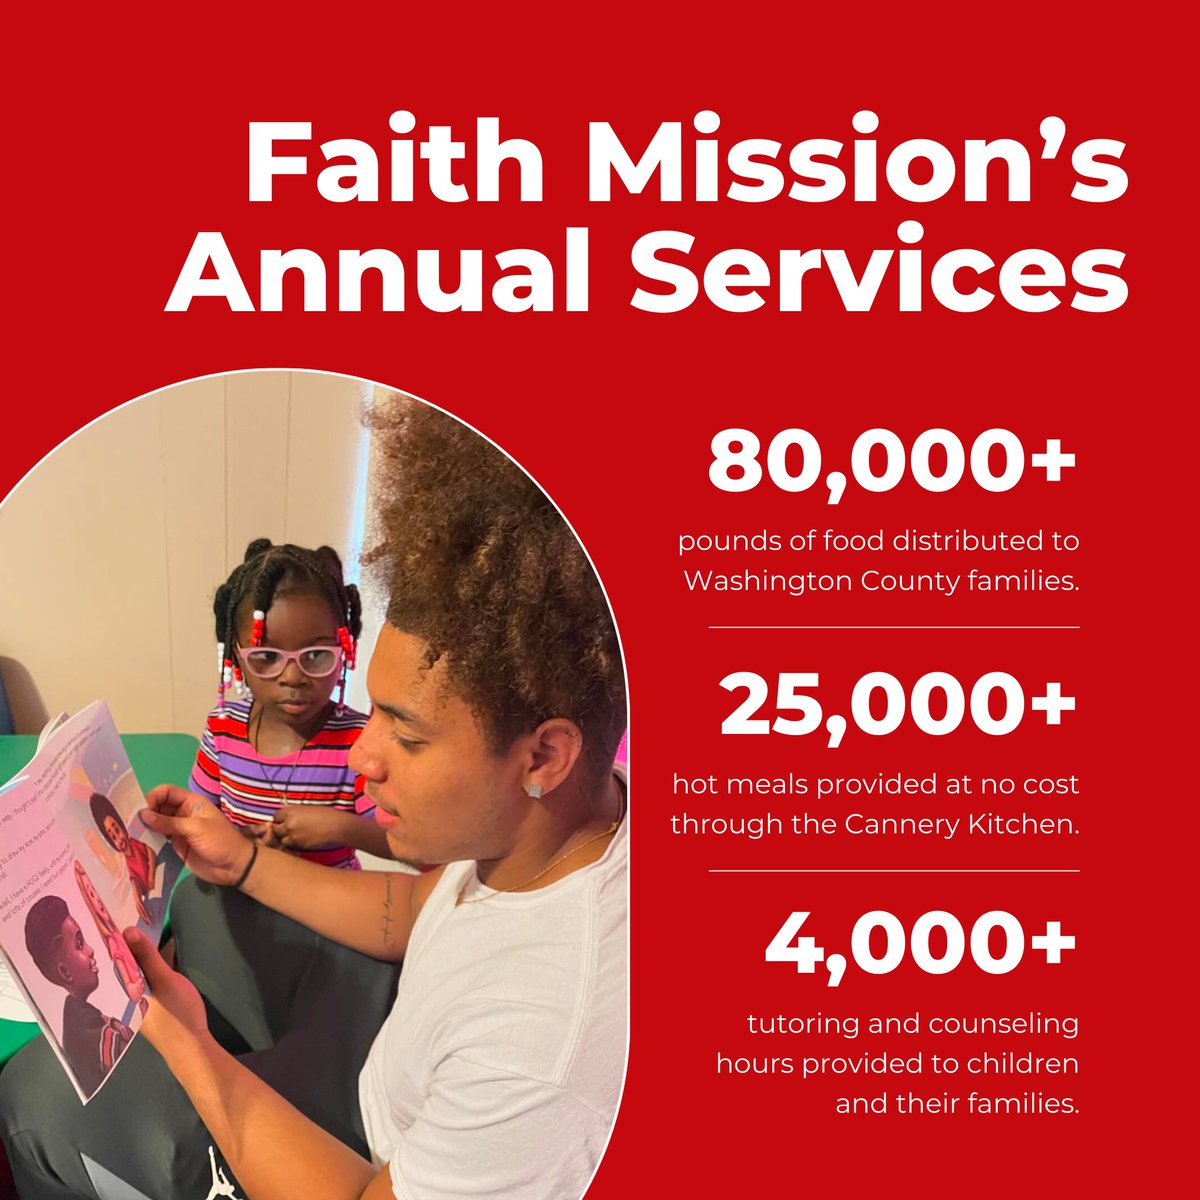 Faith Mission and Help Center, Inc. is dedicated to providing vital services to those in need. Our annual impact is reflected in the numerous meals served, shelters provided, and supportive programs offered. Join us in making a difference! Donate at faithmission.us/#donate.